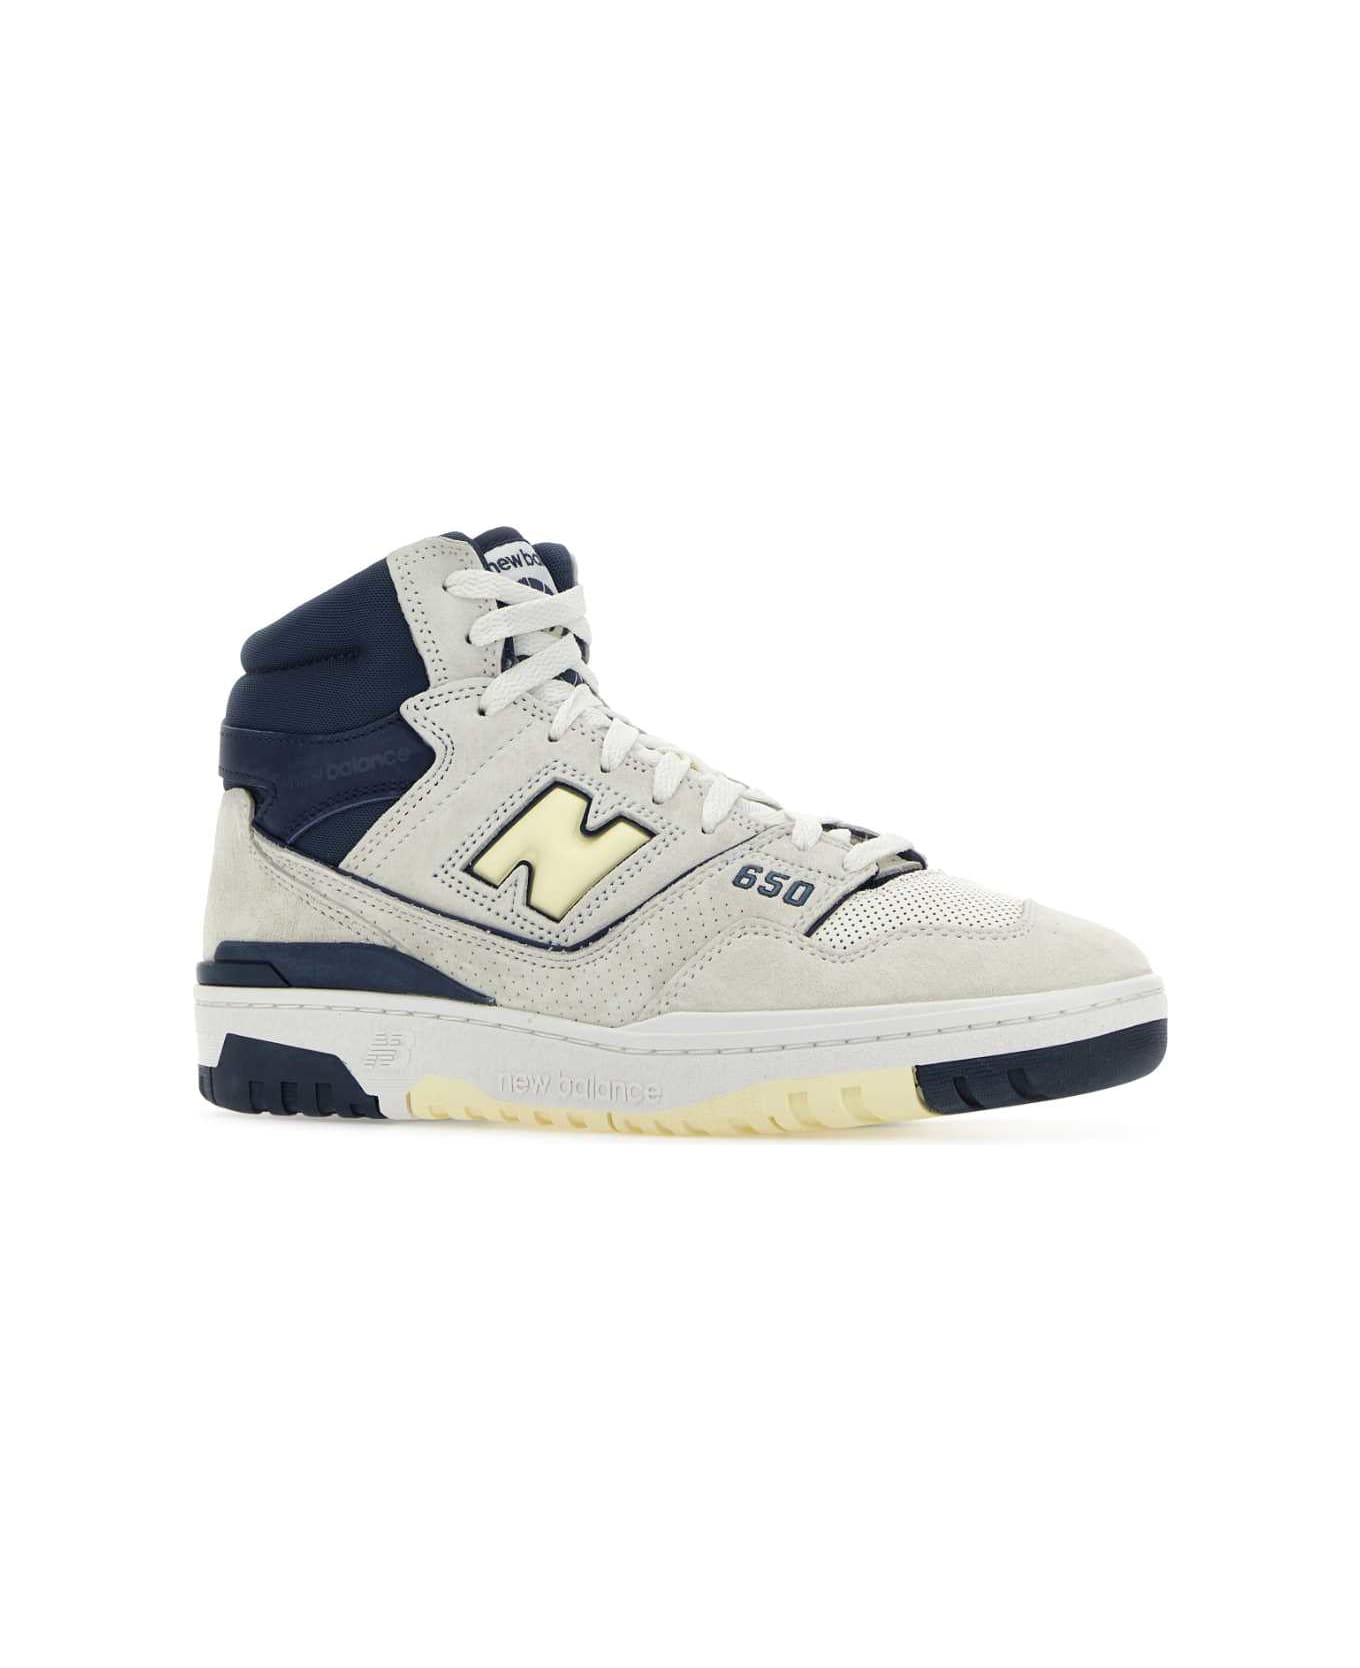 New Balance Multicolor Leather And Suede 650 Sneakers - SEASALT スニーカー